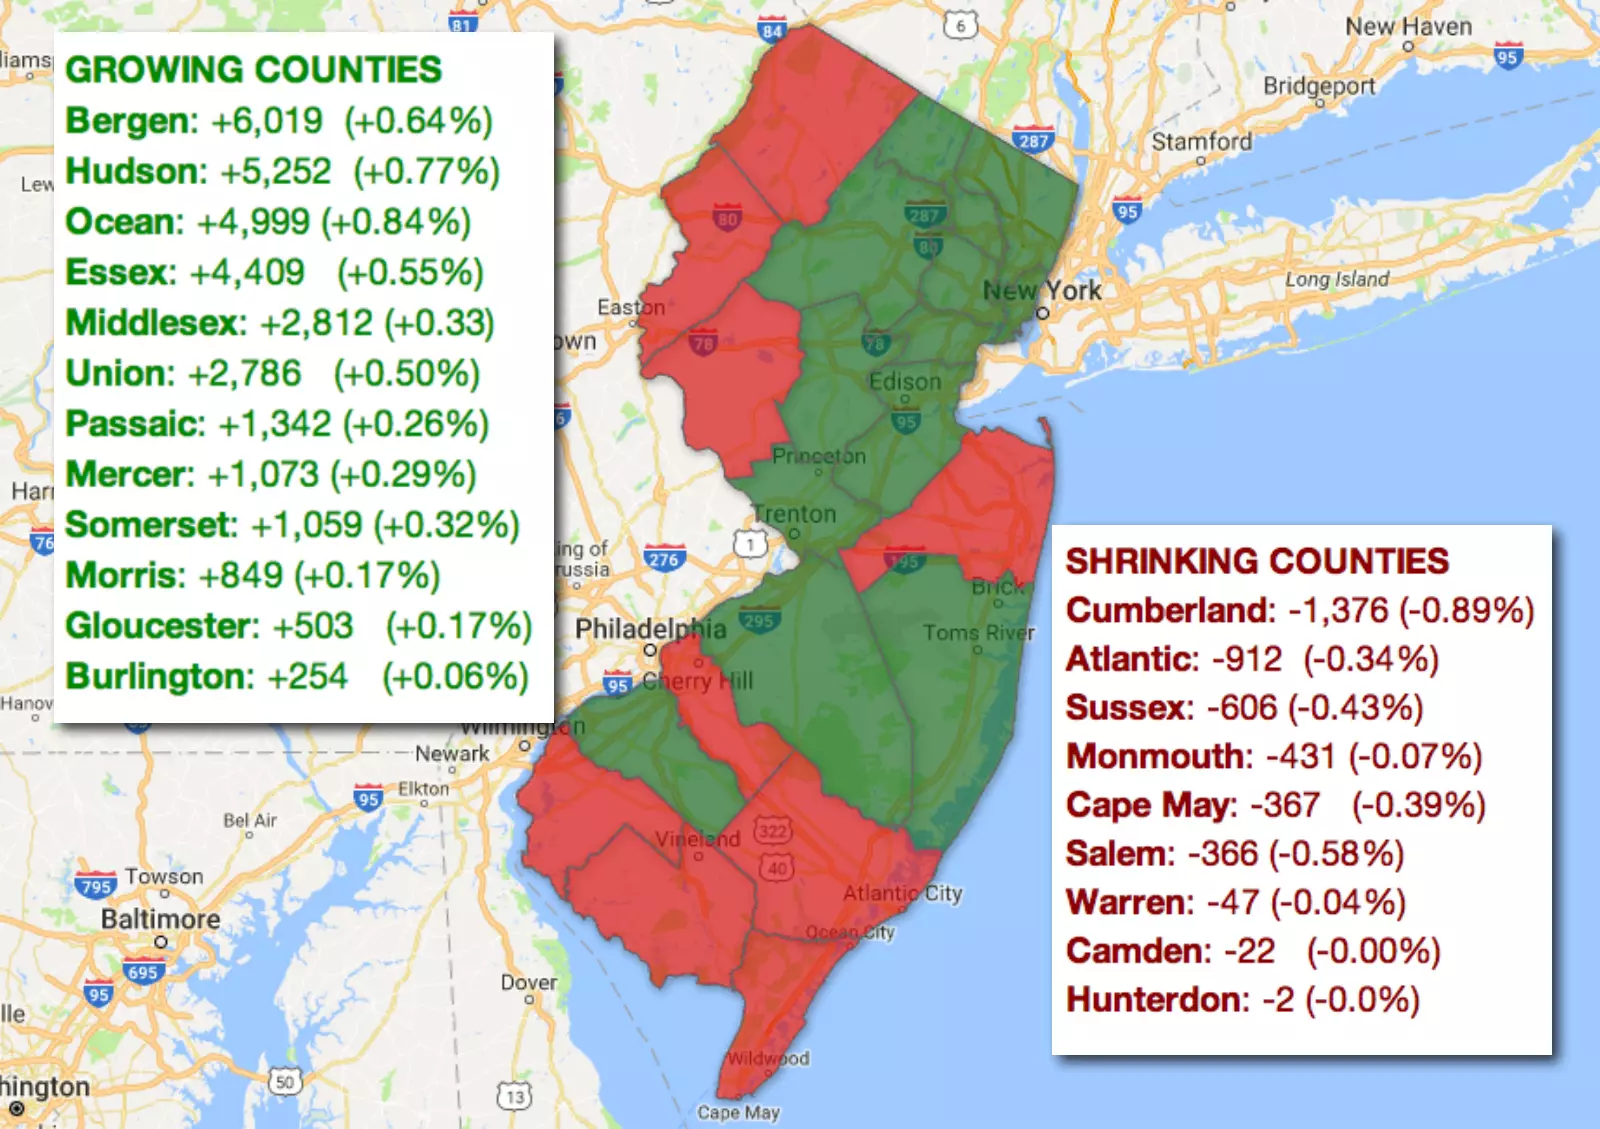 The NJ counties people are fleeing and moving to in droves